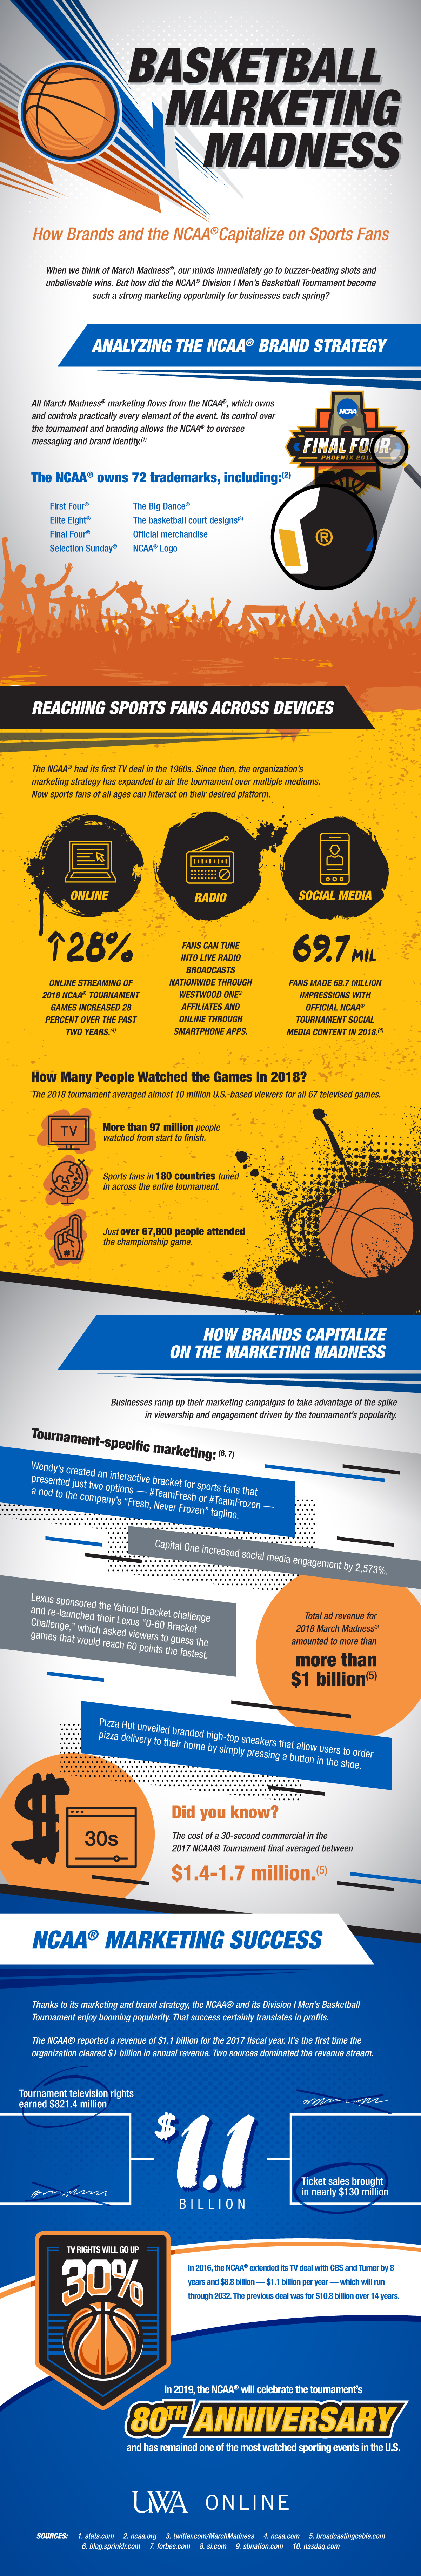 View the Basketball Marketing Madness: How Brands Capitalize on Sports Fans infographic from UWA Online